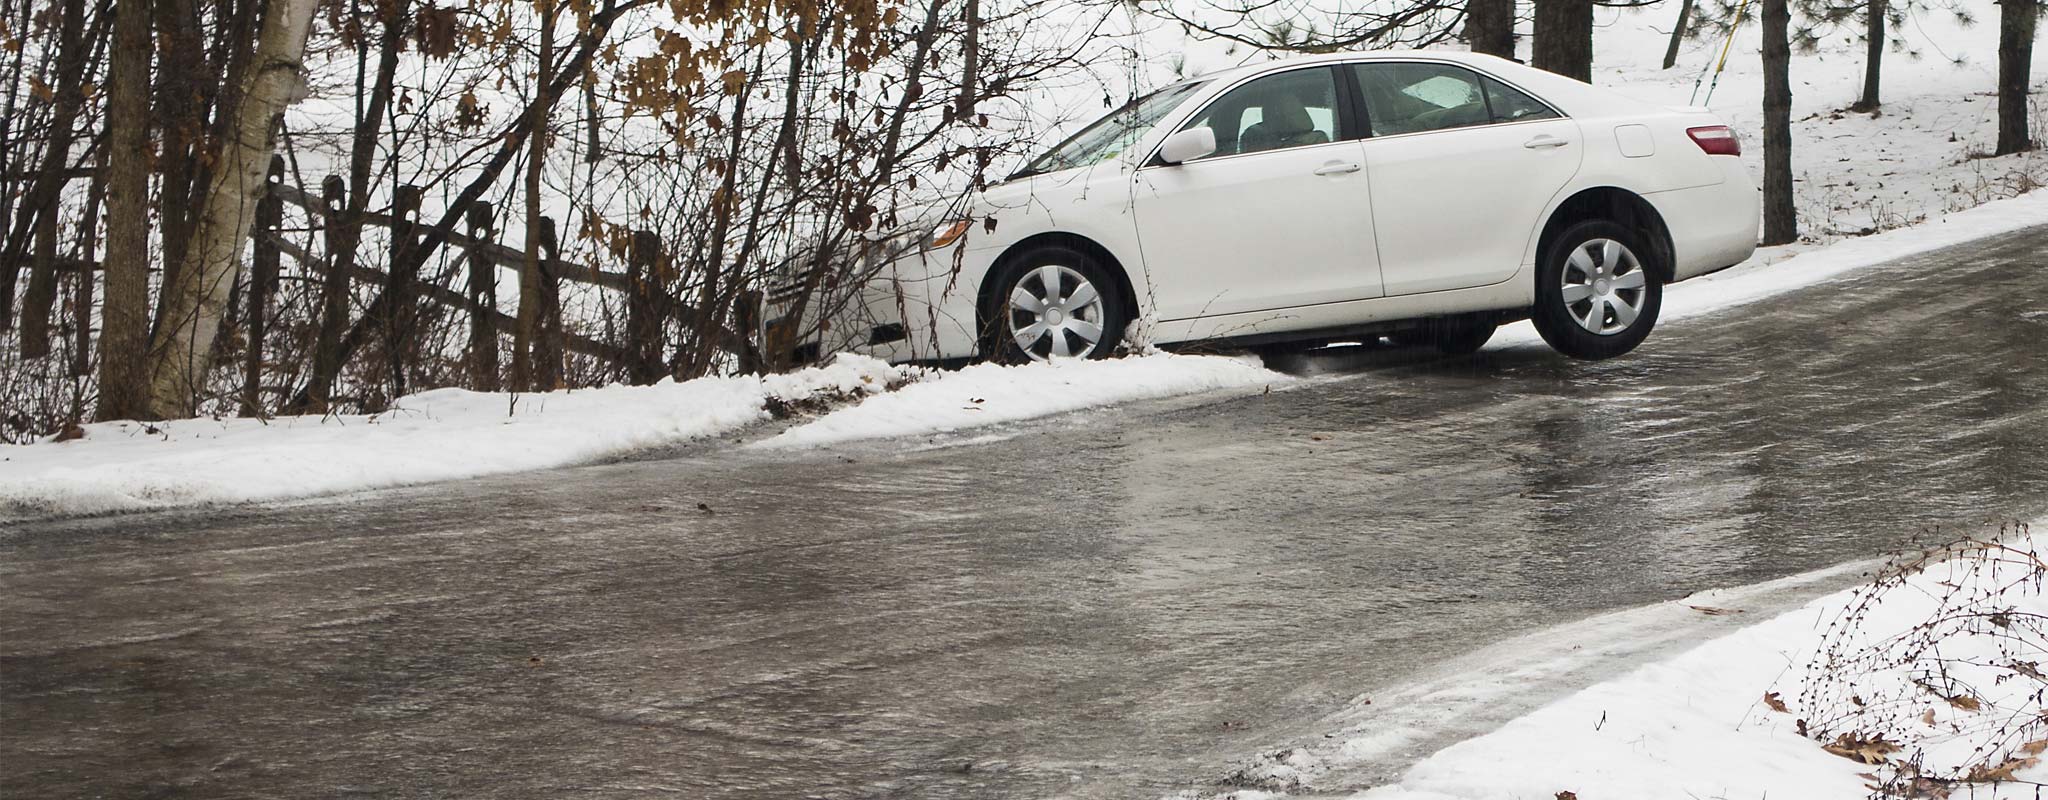 How to Reduce the Risk of Skidding on Icy Roads